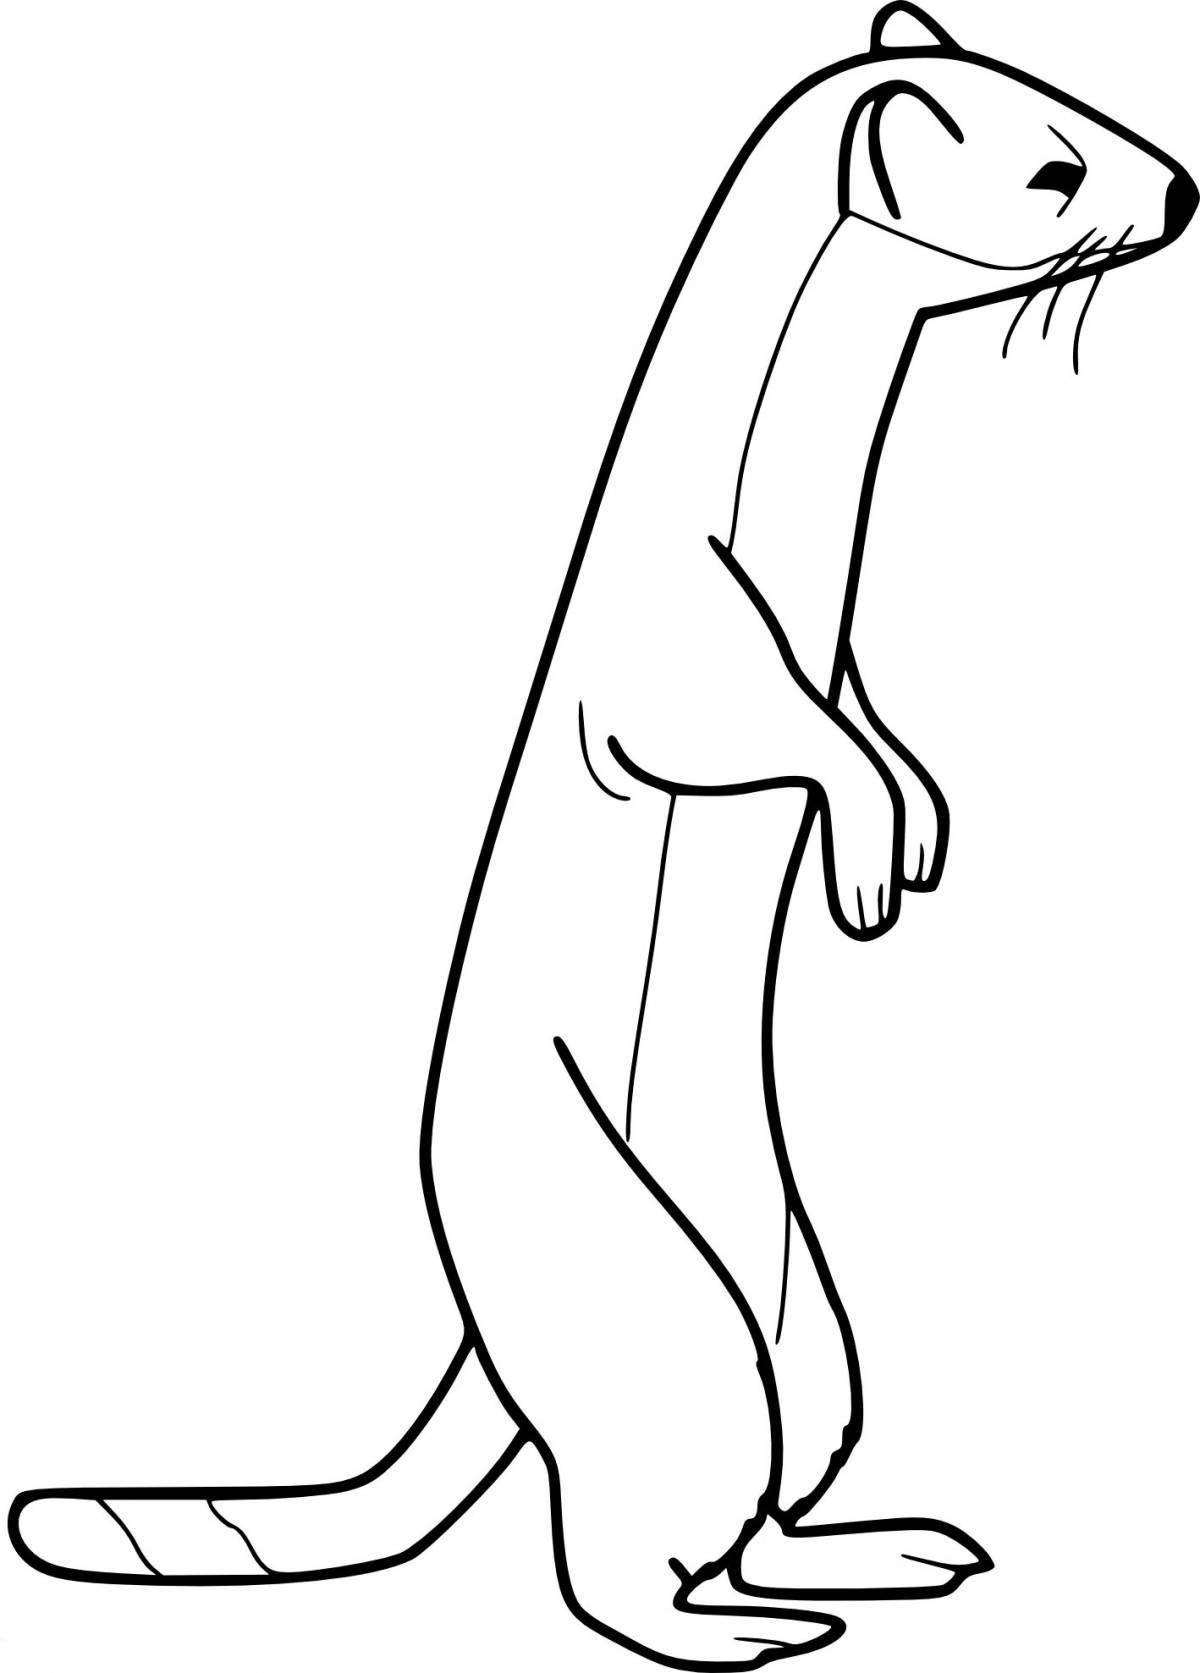 Funny weasel coloring page